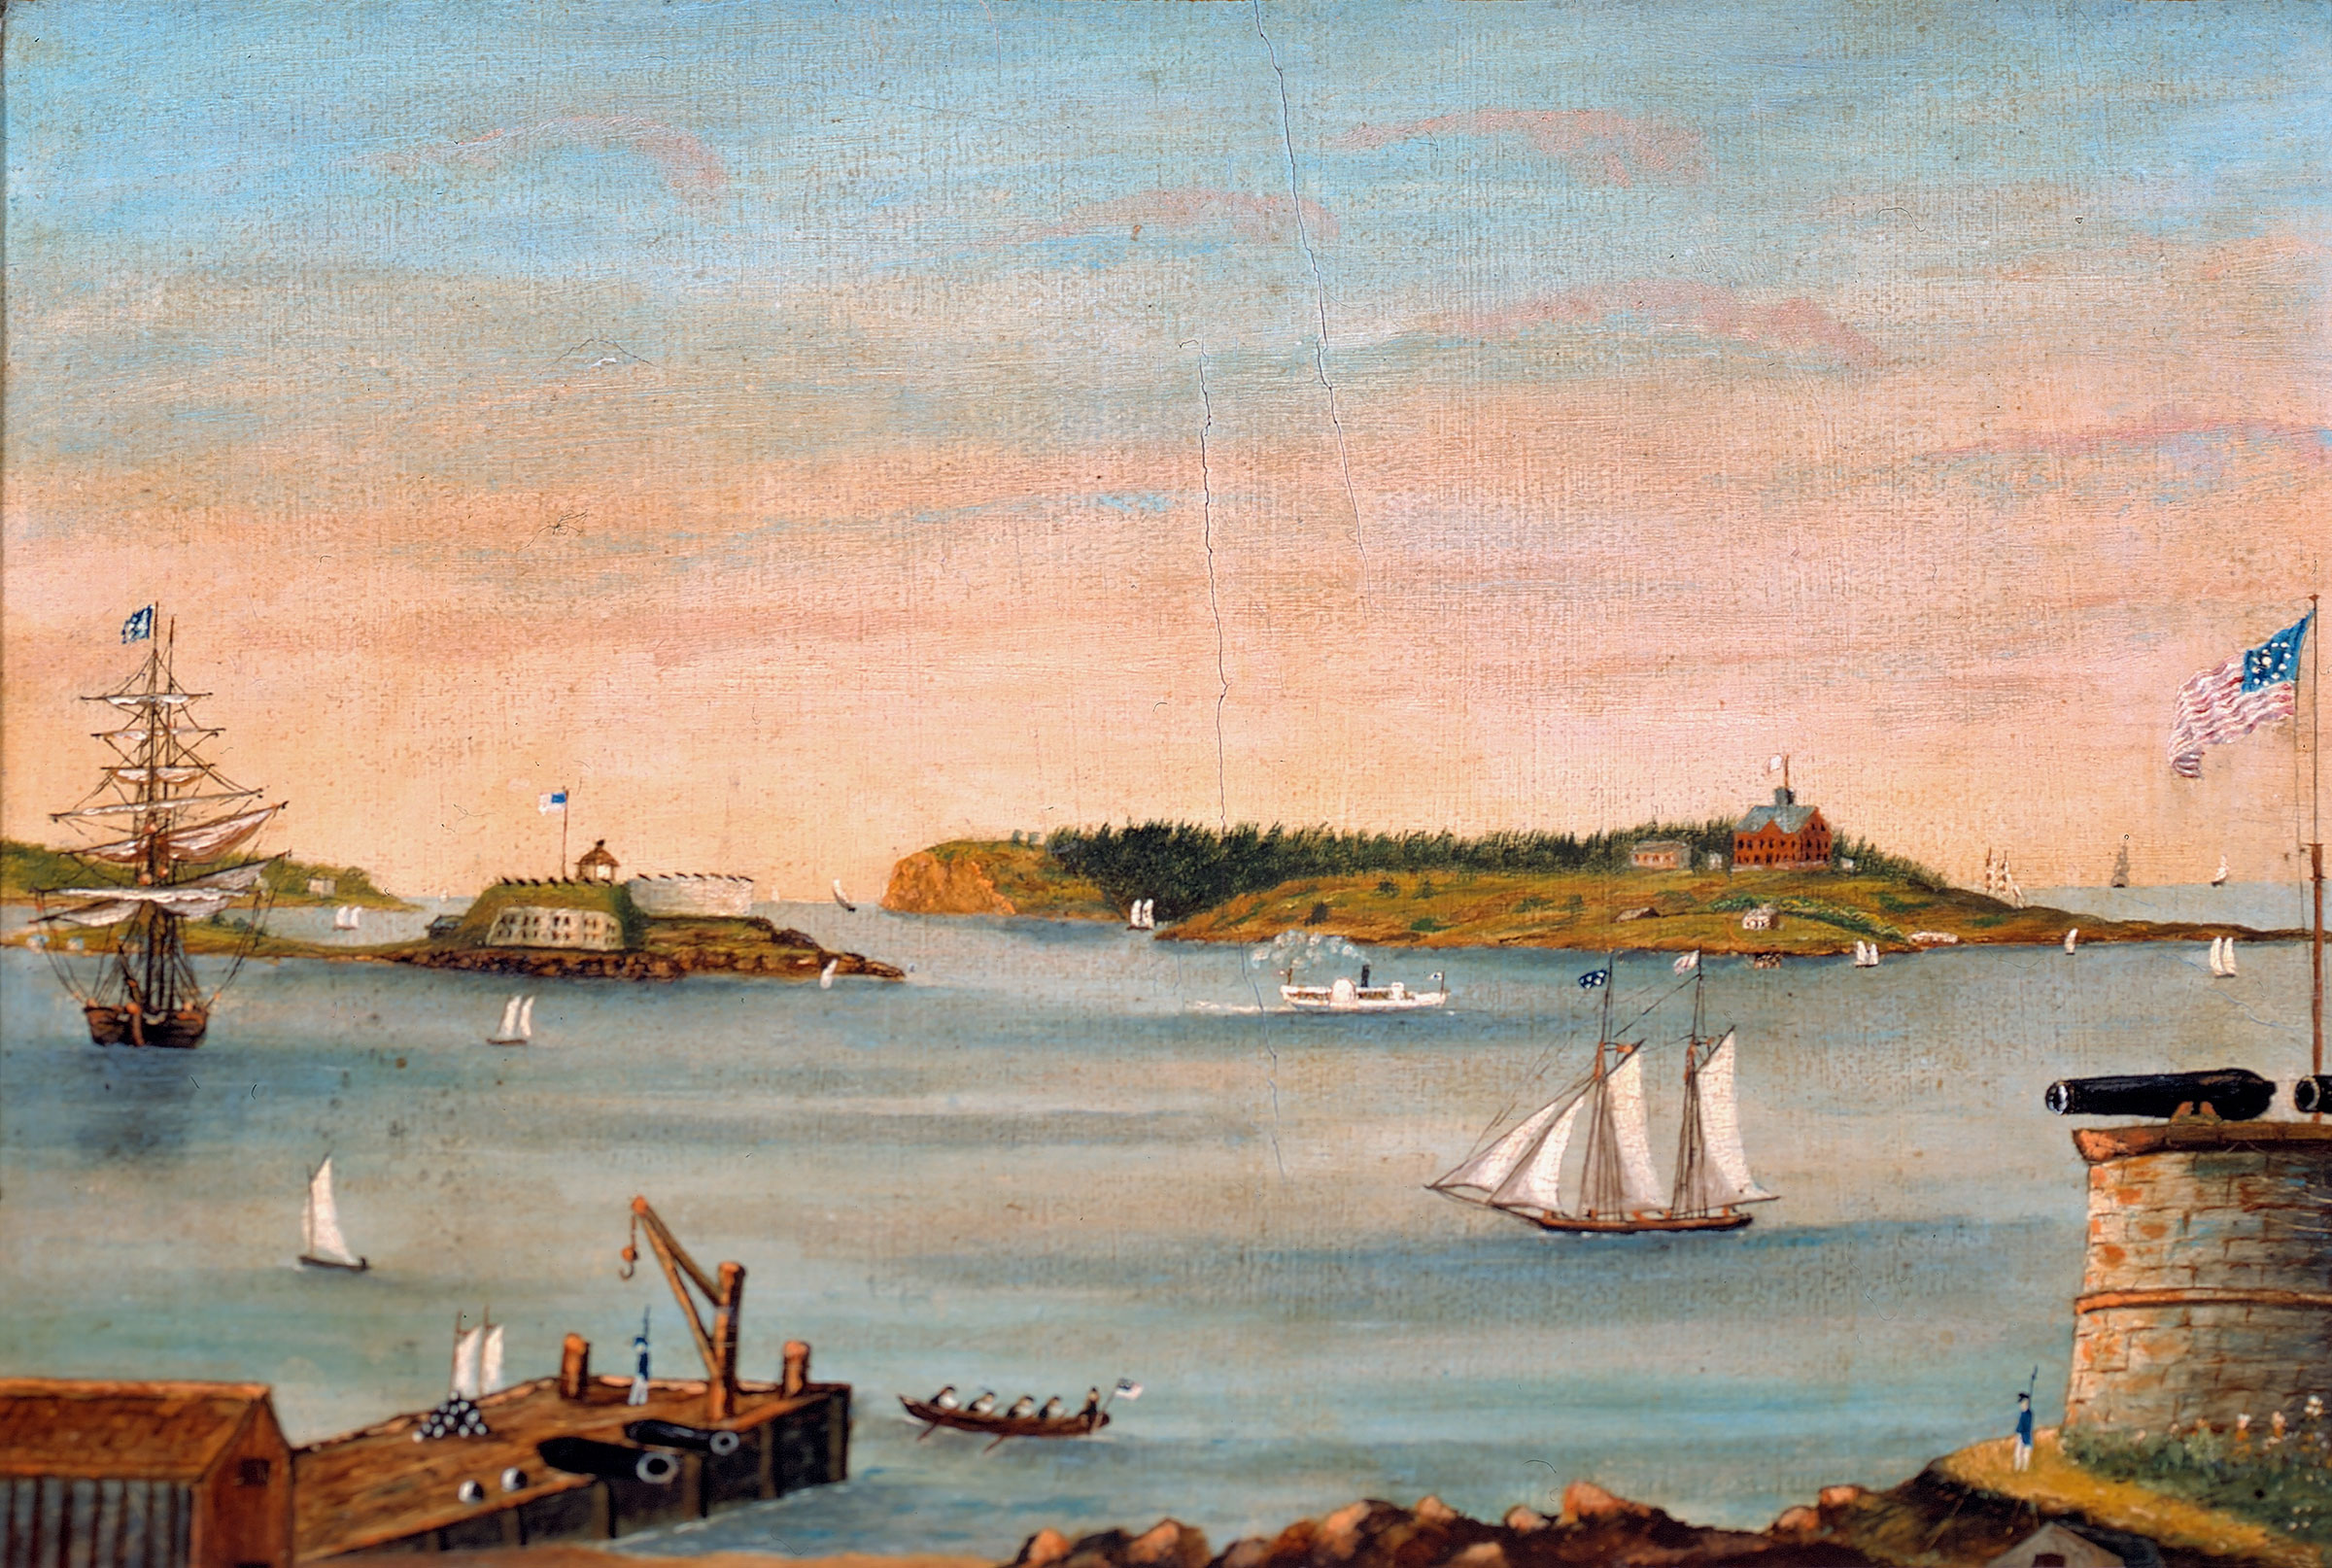 View of Portland Harbor, Cushing’s Island and Fort Scammel from Fort Preble, c. 1853–1862.